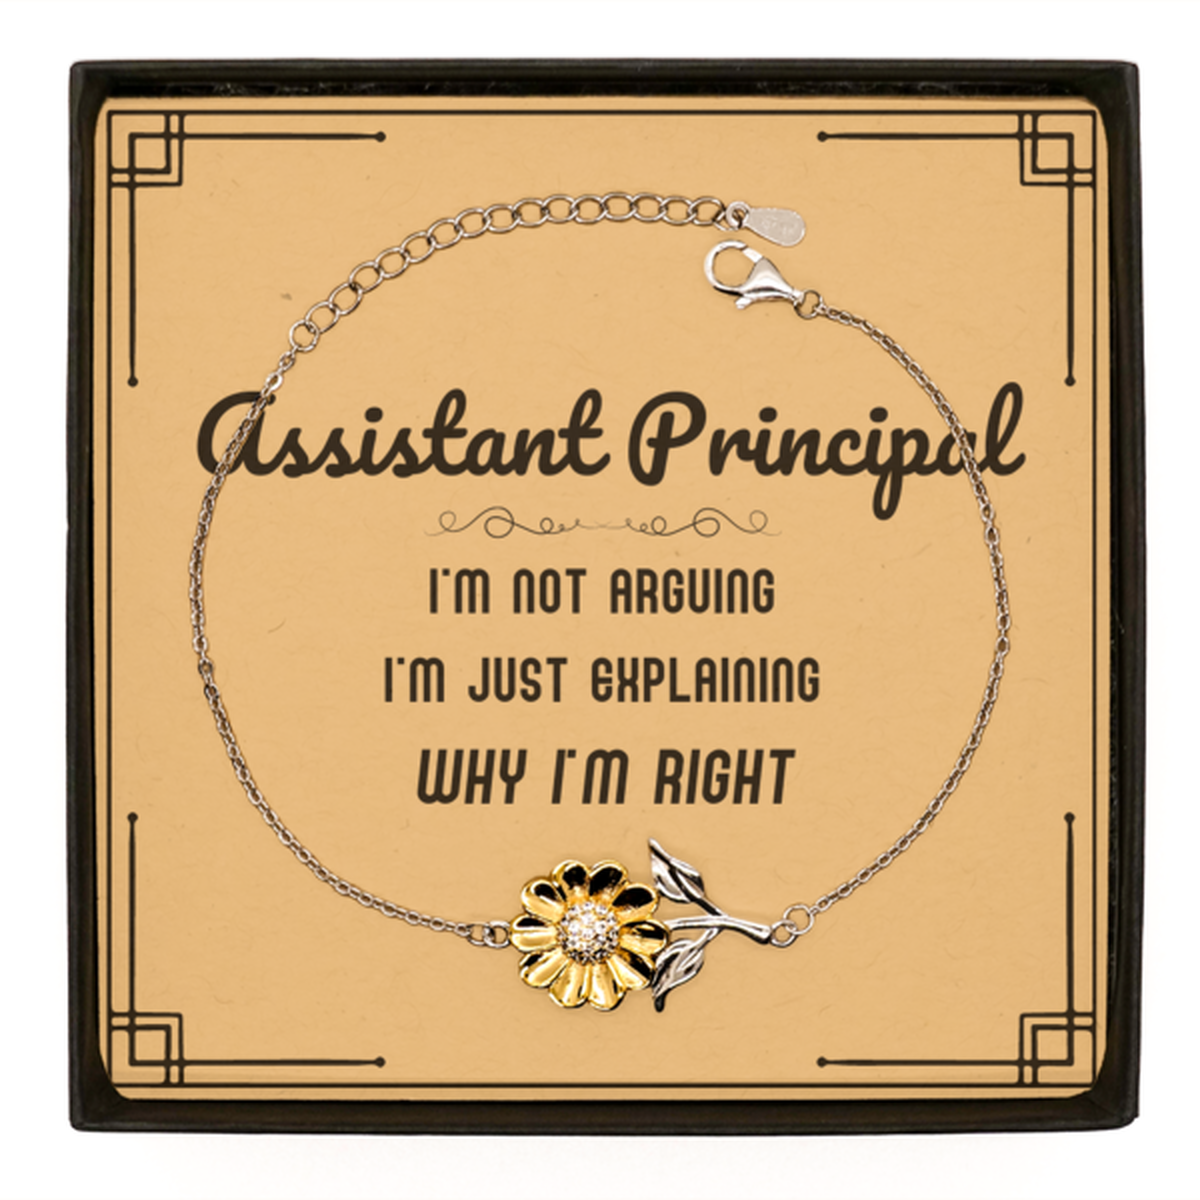 Assistant Principal I'm not Arguing. I'm Just Explaining Why I'm RIGHT Sunflower Bracelet, Funny Saying Quote Assistant Principal Gifts For Assistant Principal Message Card Graduation Birthday Christmas Gifts for Men Women Coworker